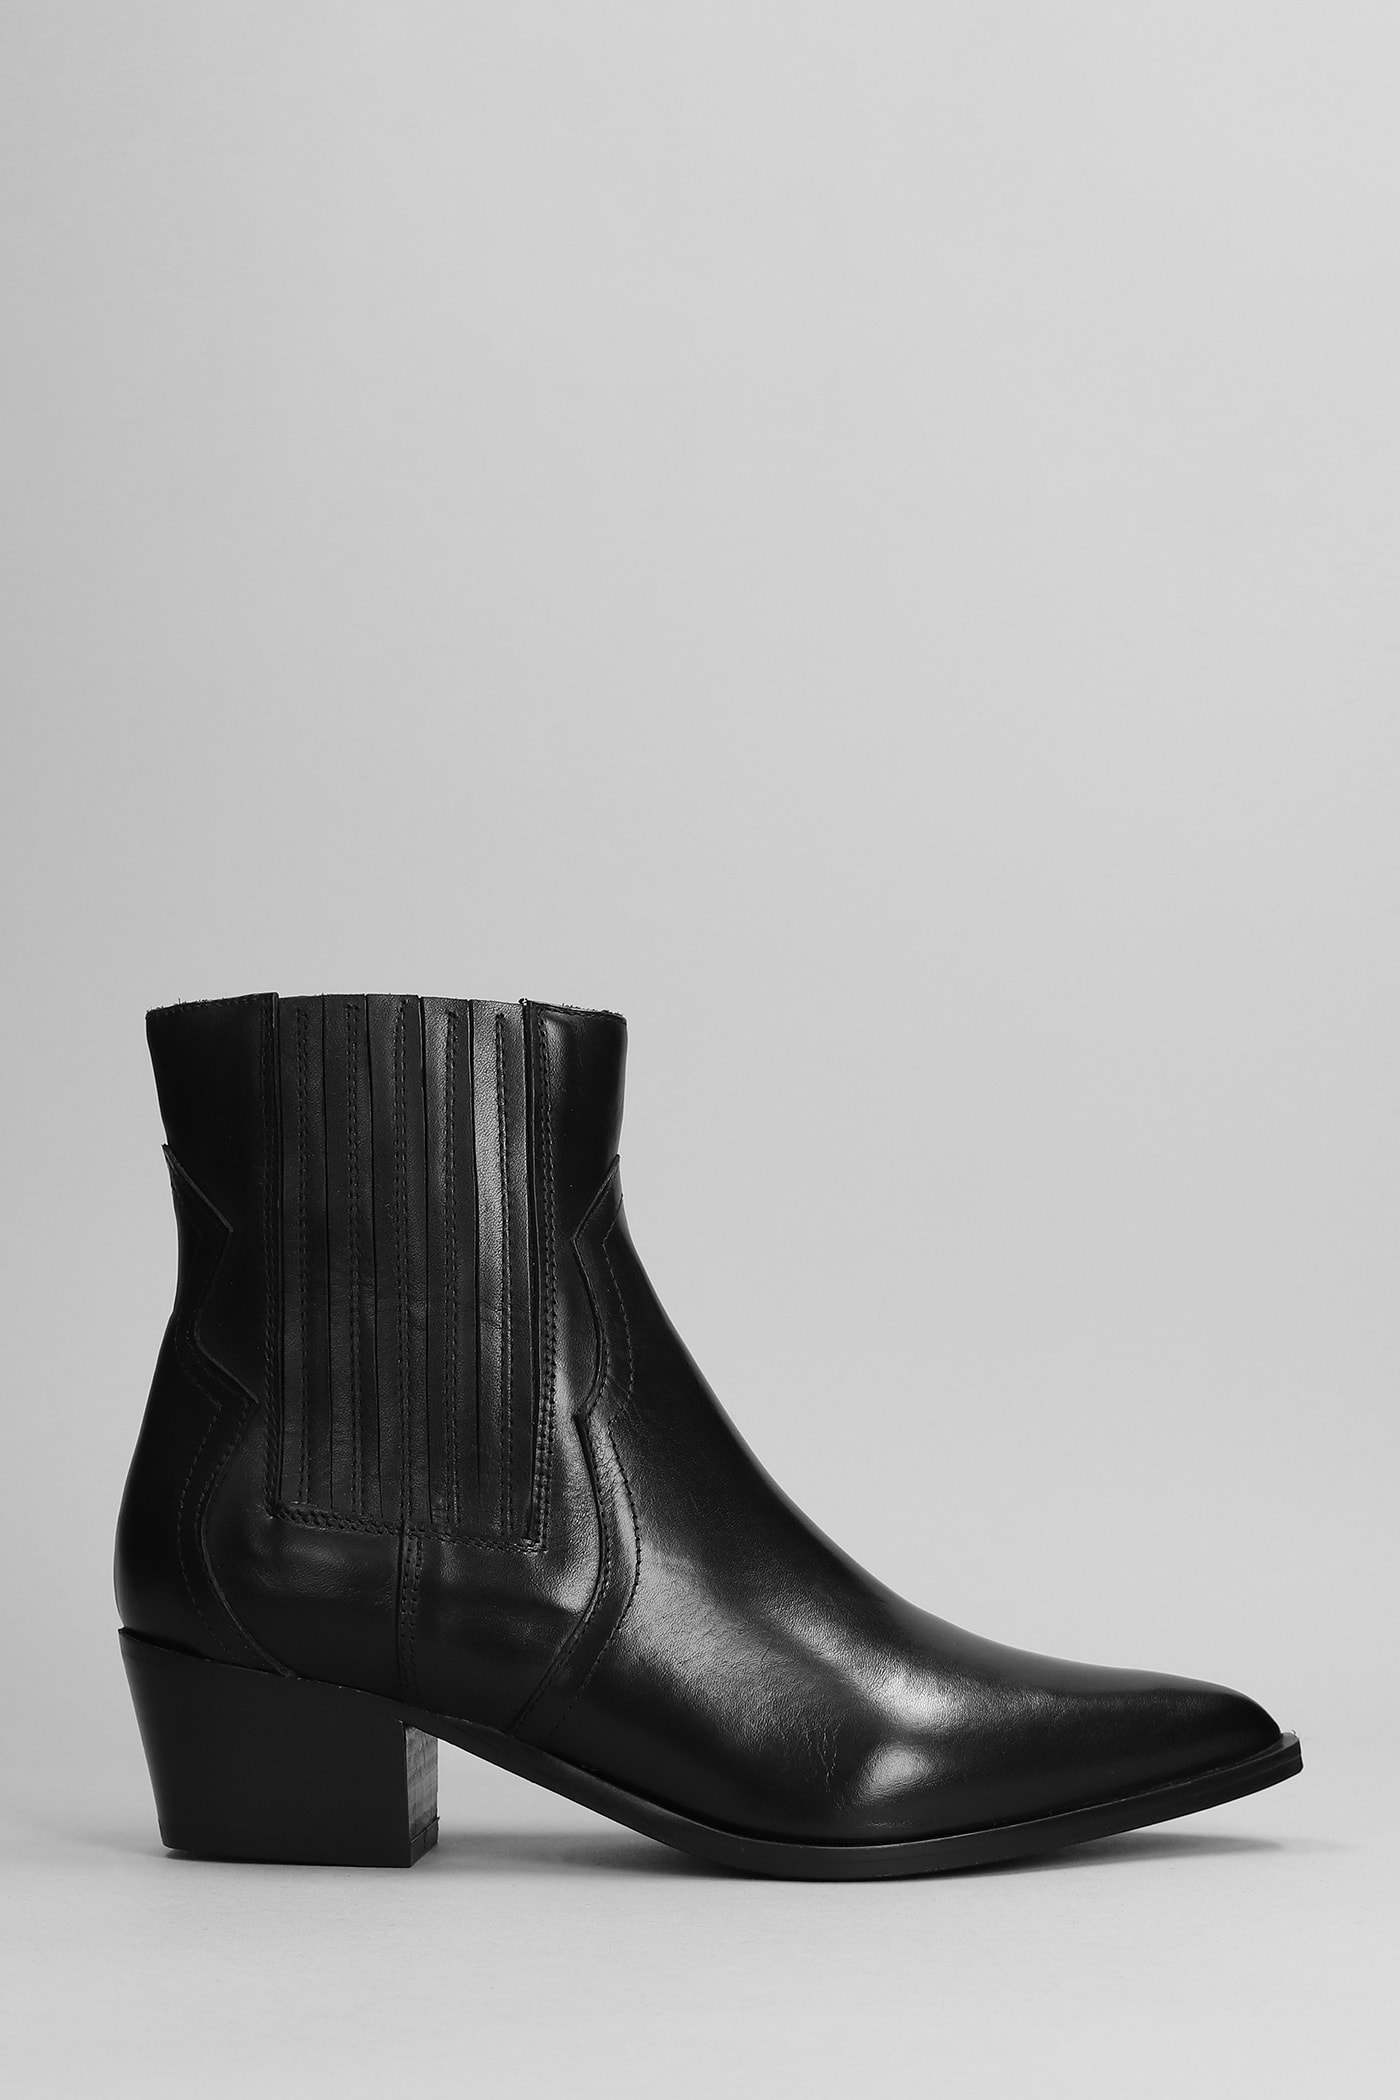 Julie Dee Texan Ankle Boots In Black Leather